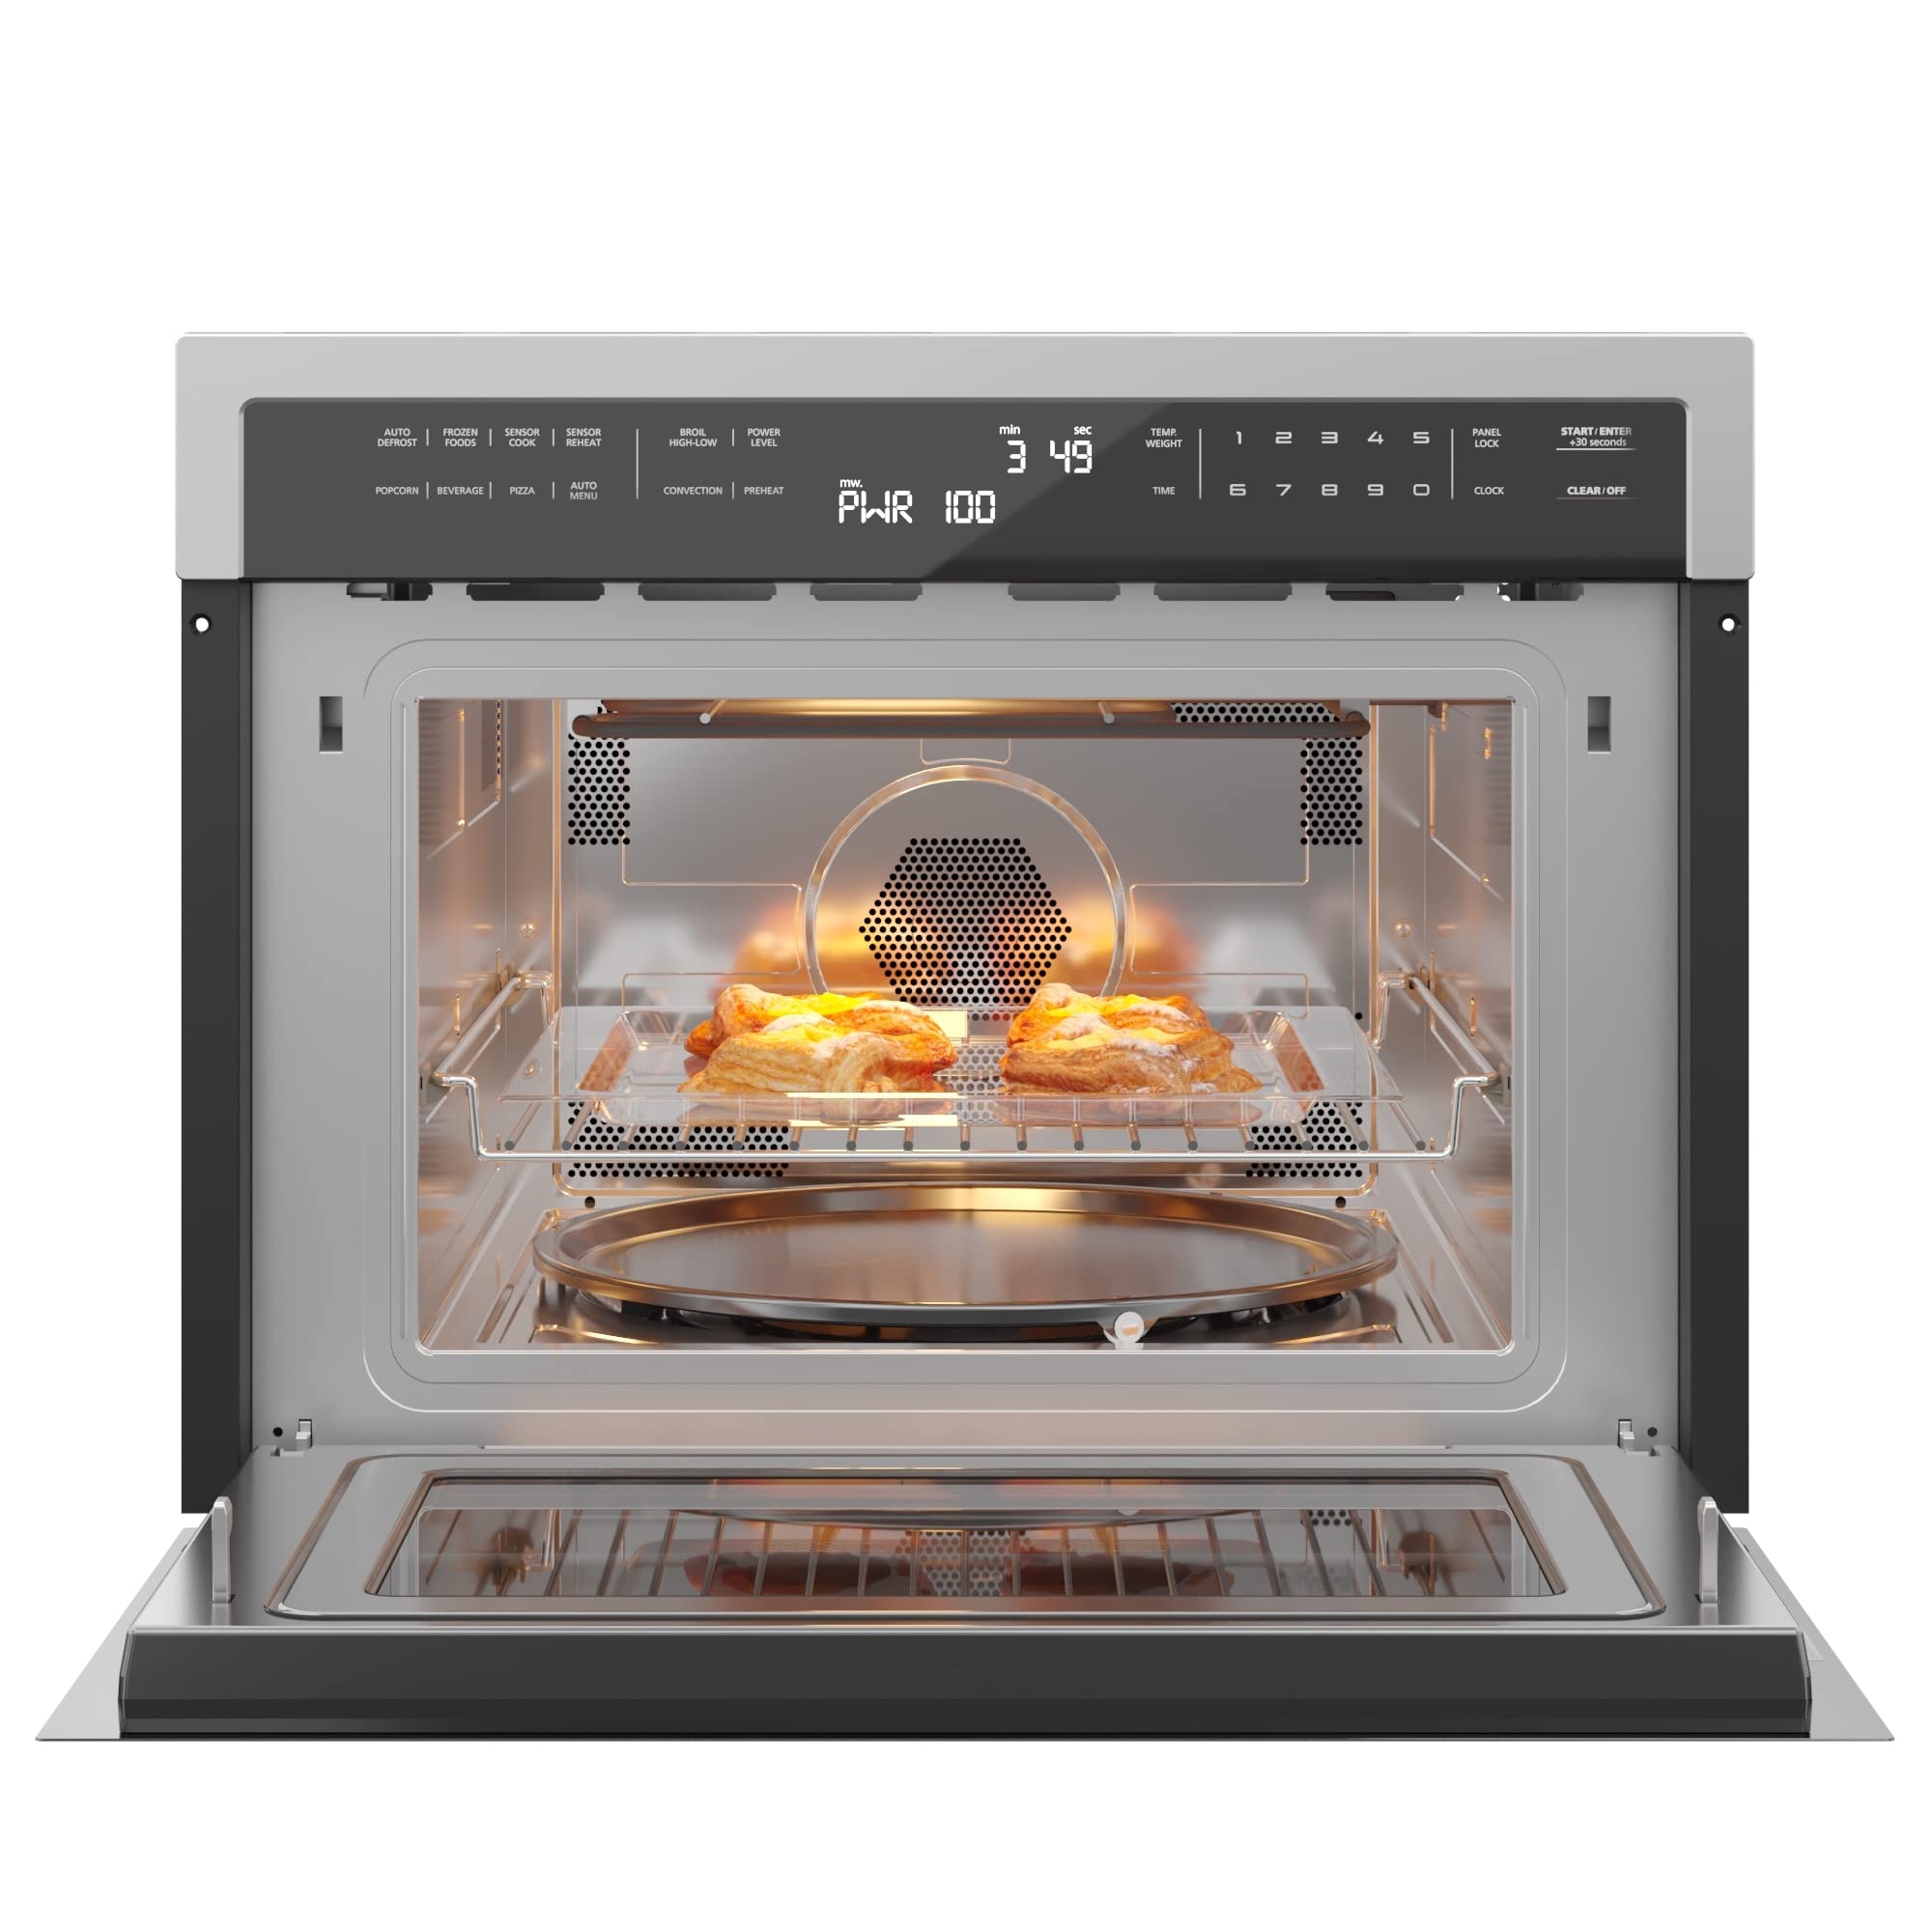 KoolMore KM-CWO24-SS 24 Inch Built-in Convection Oven and Microwave Combination with Broil, Soft Close Door, 1000 Watt Power, Stainless Steel Finish, Touch Control LCD Display, 1.6 Cu. Ft, Silver